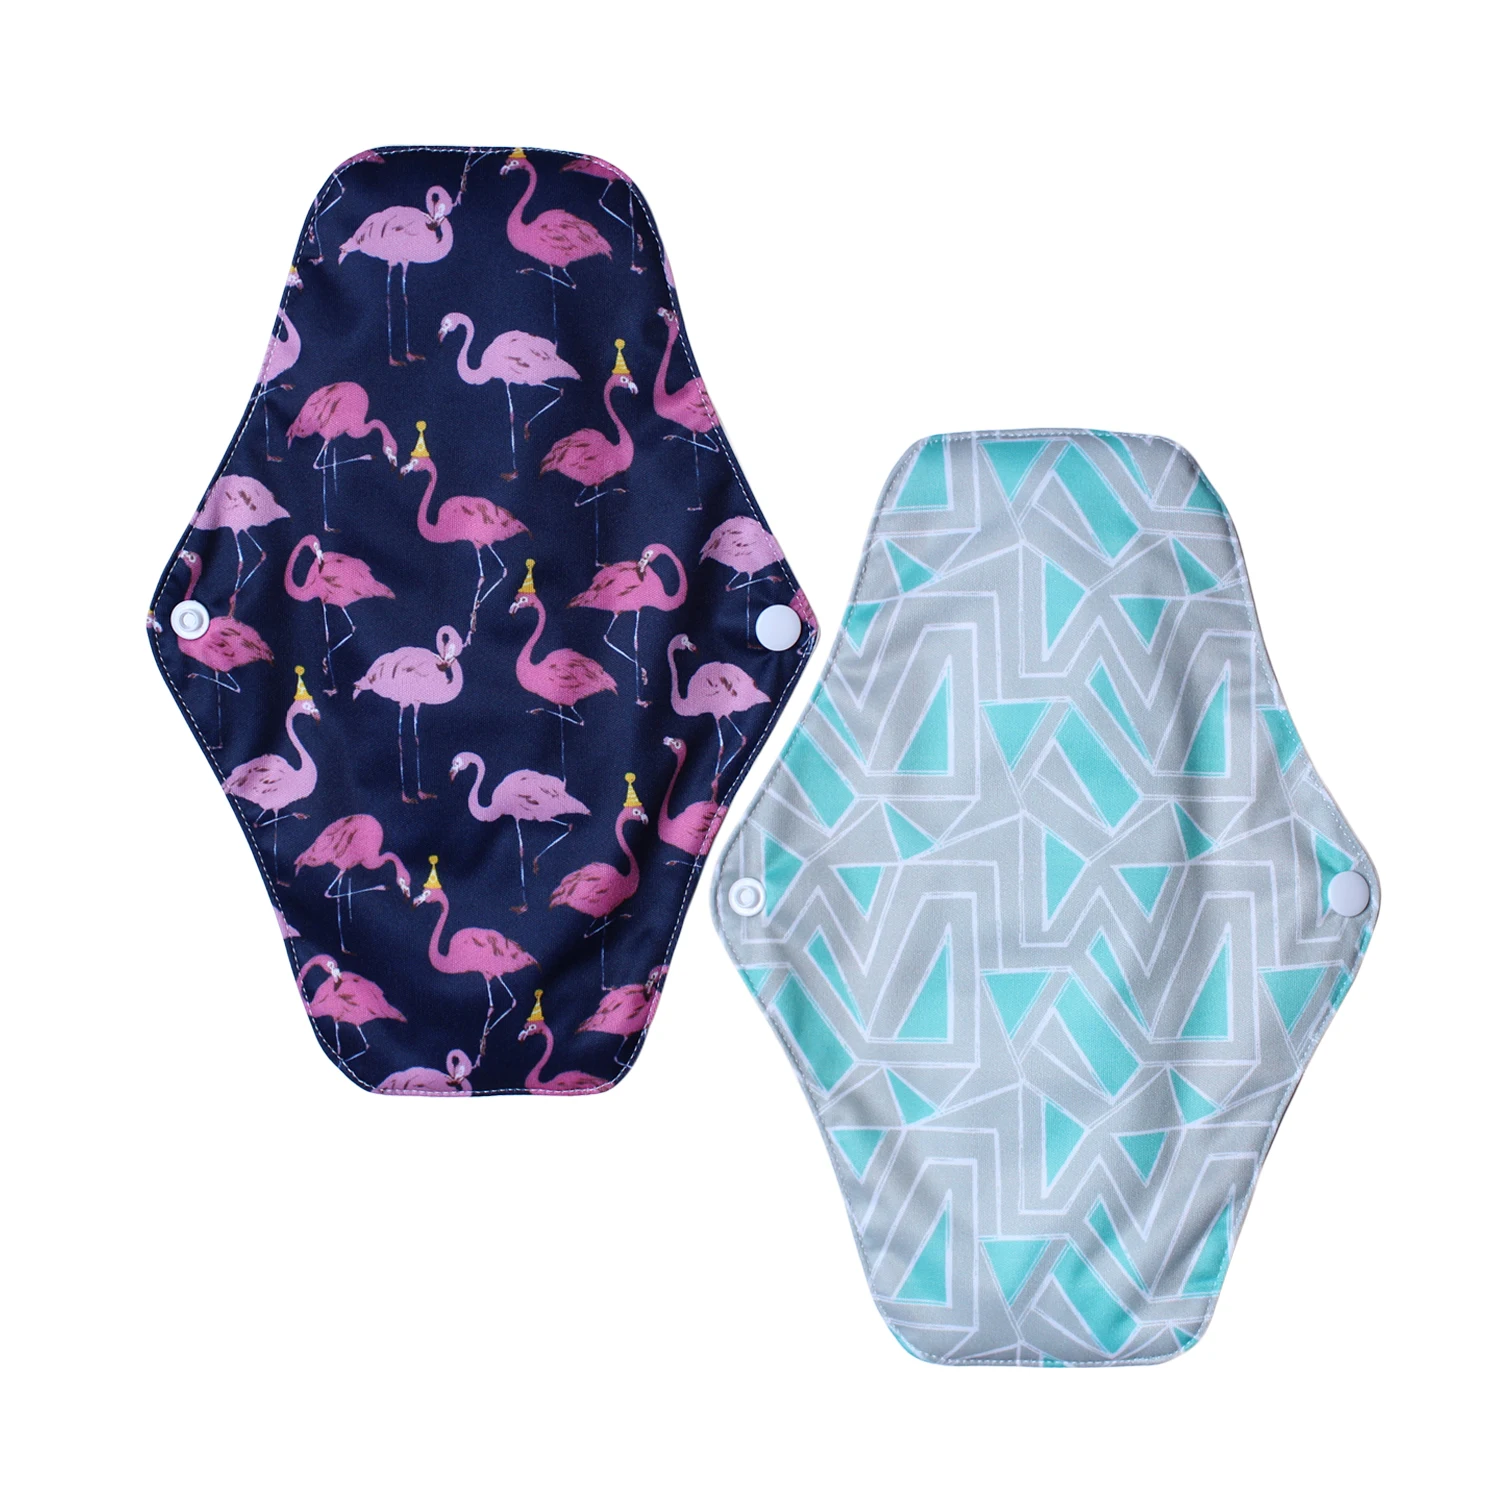 Private Logo Cotton Period Pads Washable Women Cloth Sanitary Pads Reusable Menstrual Napkin - Buy Cloth Sanitary Pads Reusable,Cotton Period Pads,Women Sanitary Pads Product on Alibaba.com